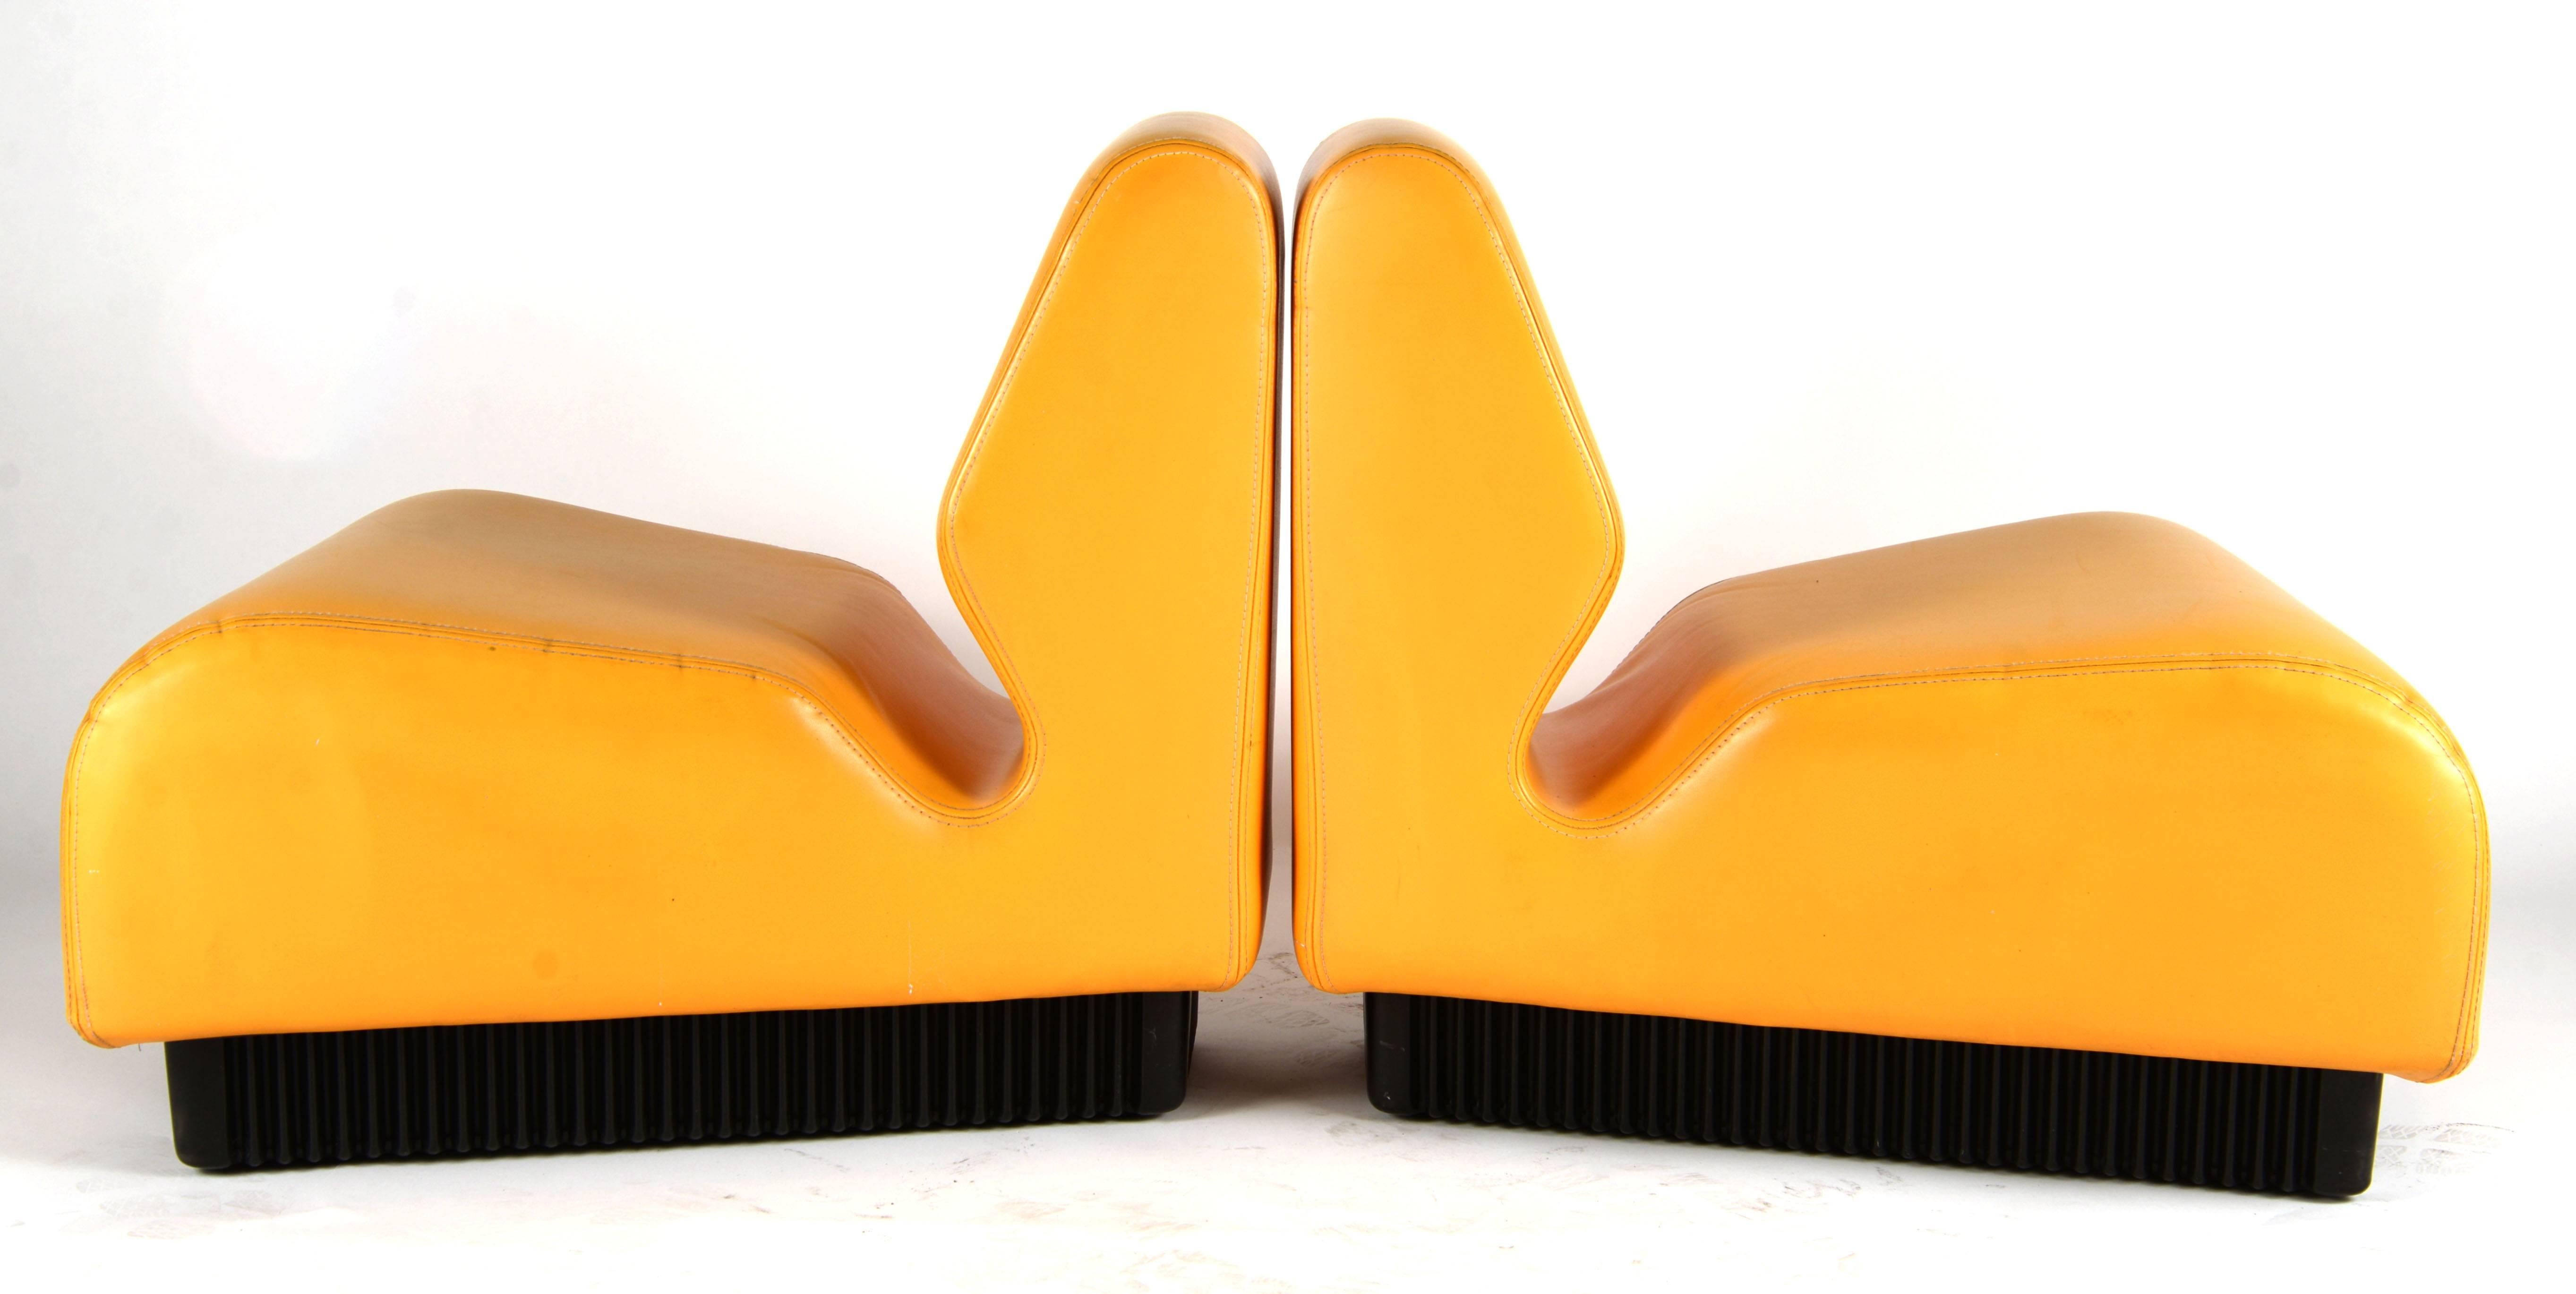 Pair of modular yellow double stitched airport lounge chairs design by Herman Miller in the 1970s.
  